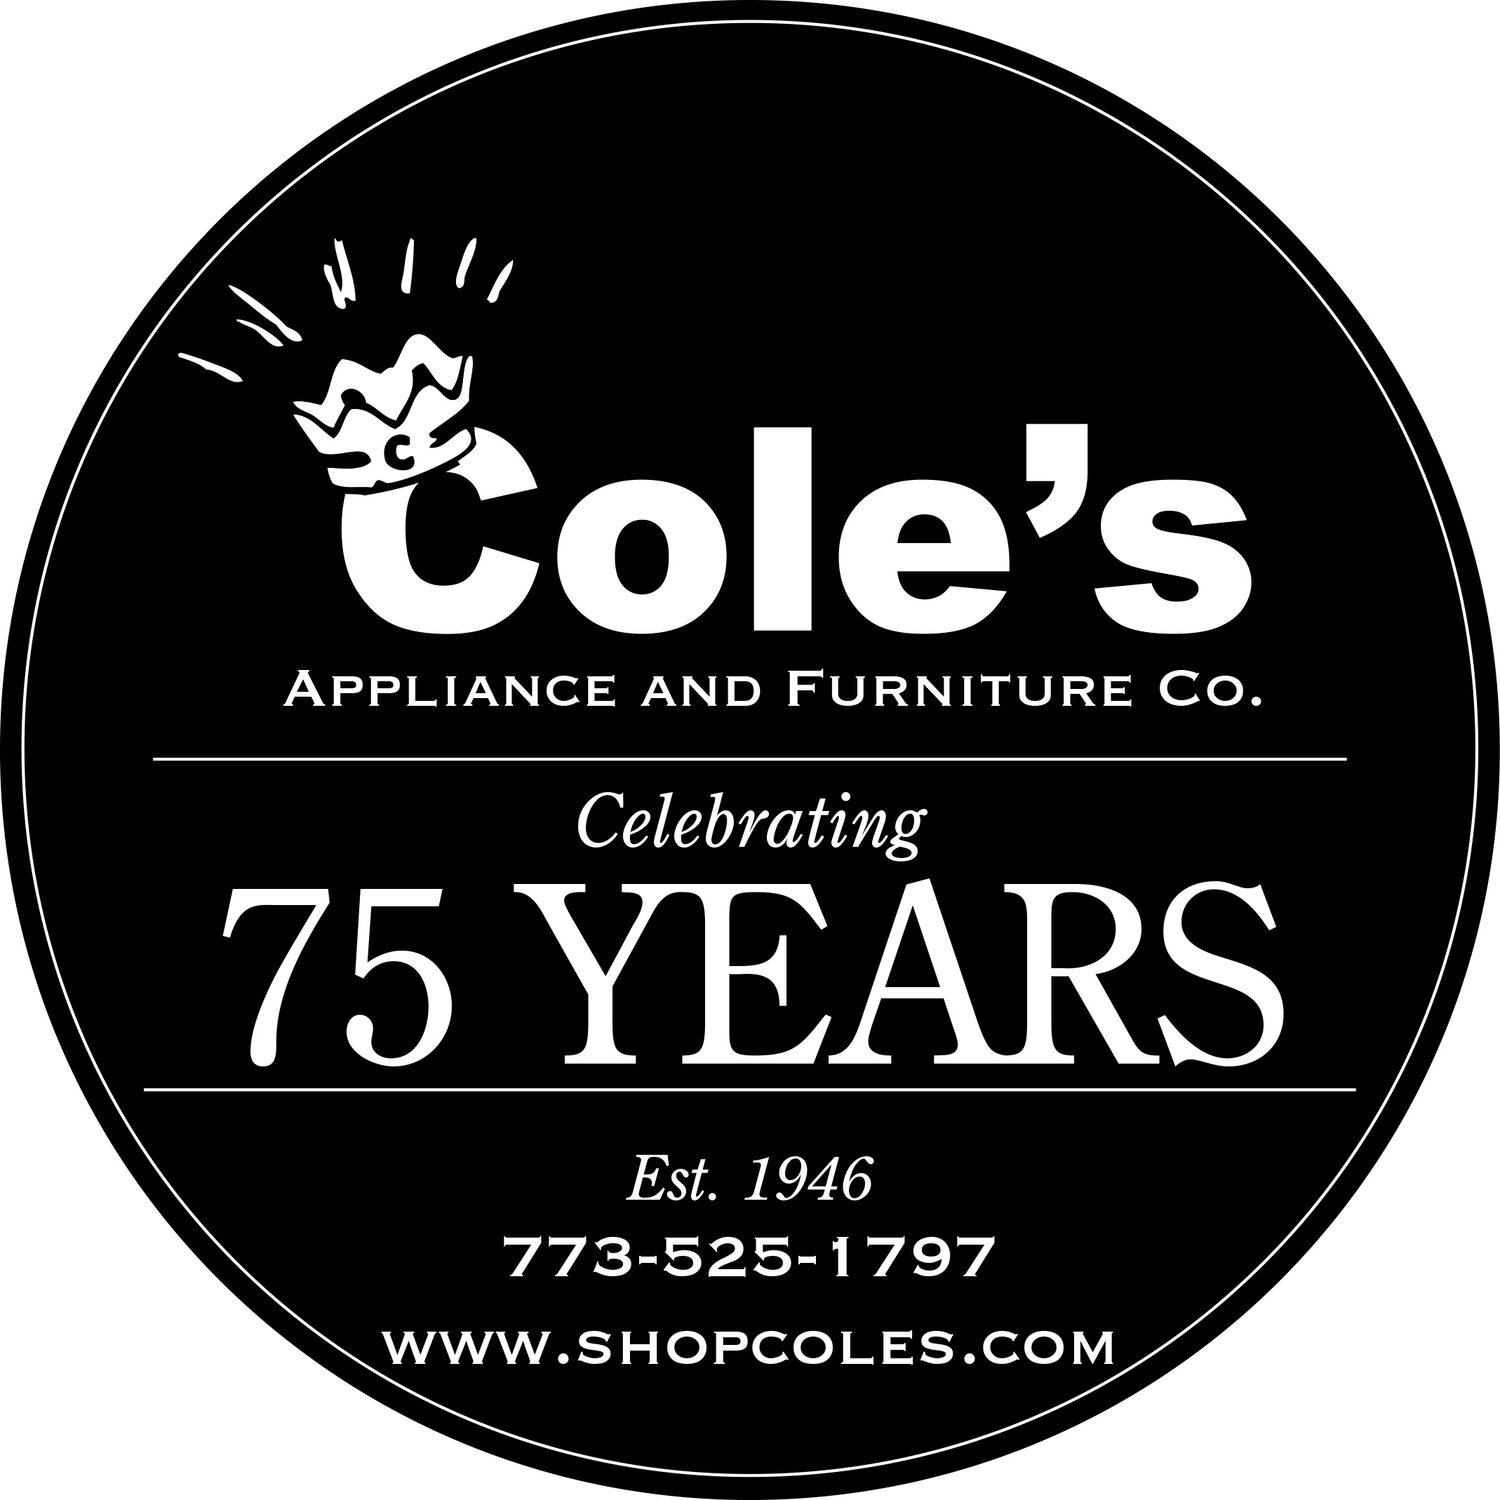 Cole's Appliance and Furniture Co.